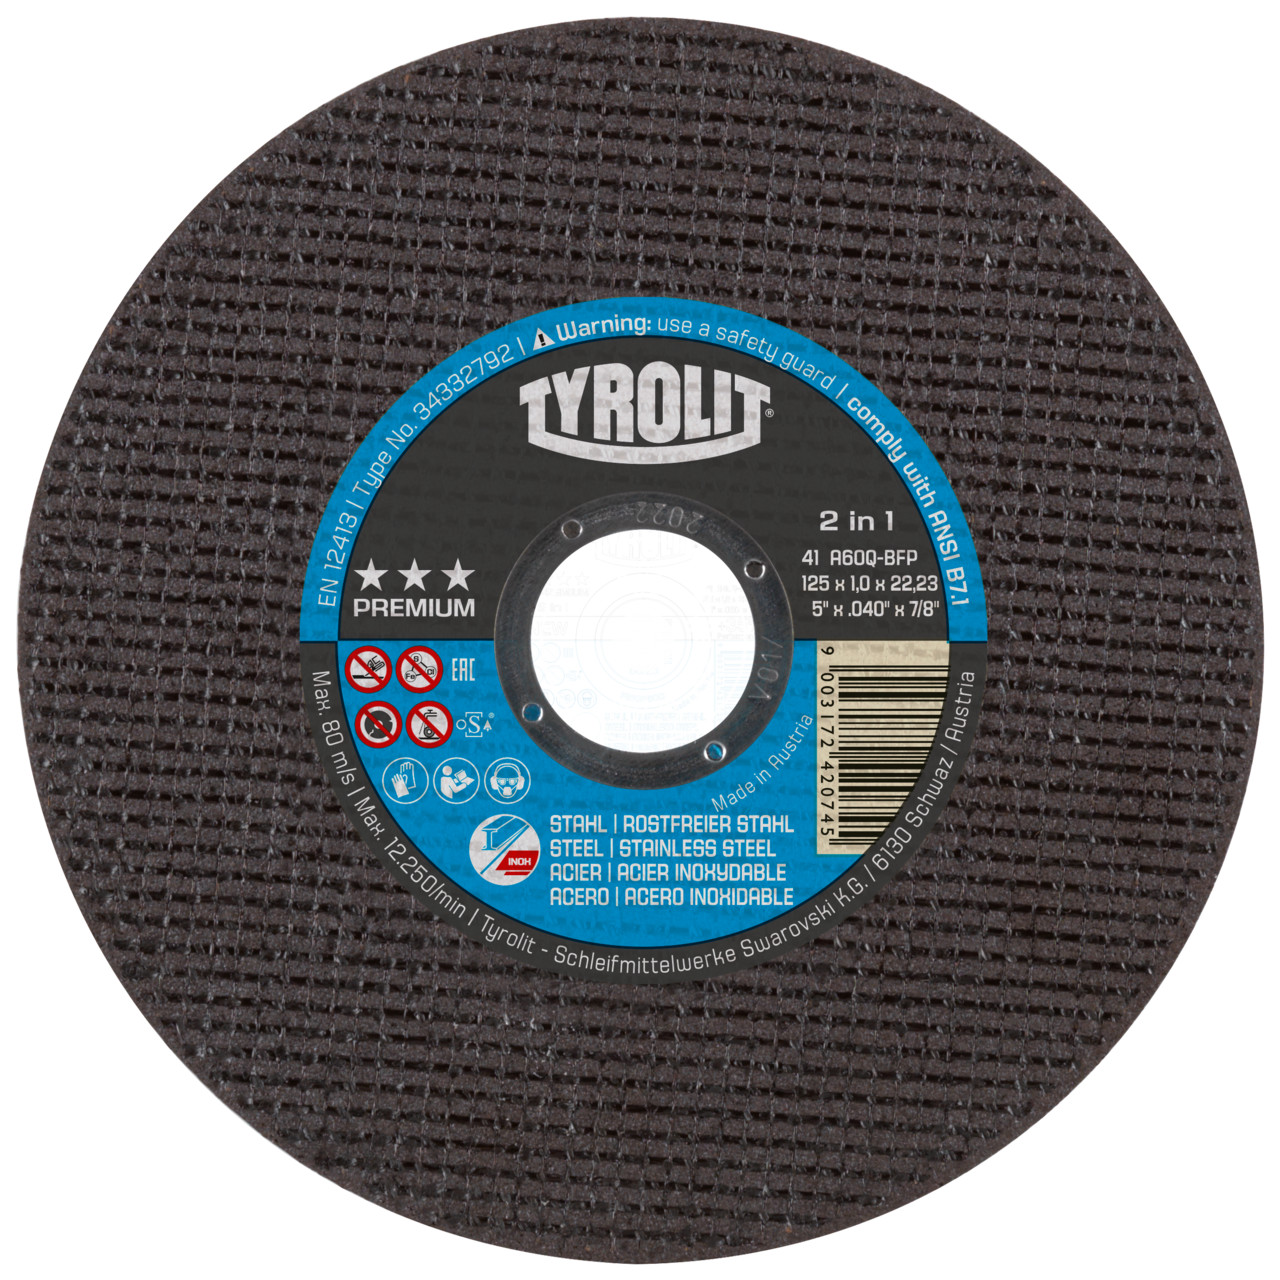 TYROLIT cut-off wheels DxUxH 230x3.0x22.23 2in1 for steel and stainless steel, shape: 42 - offset version, Art. 872351